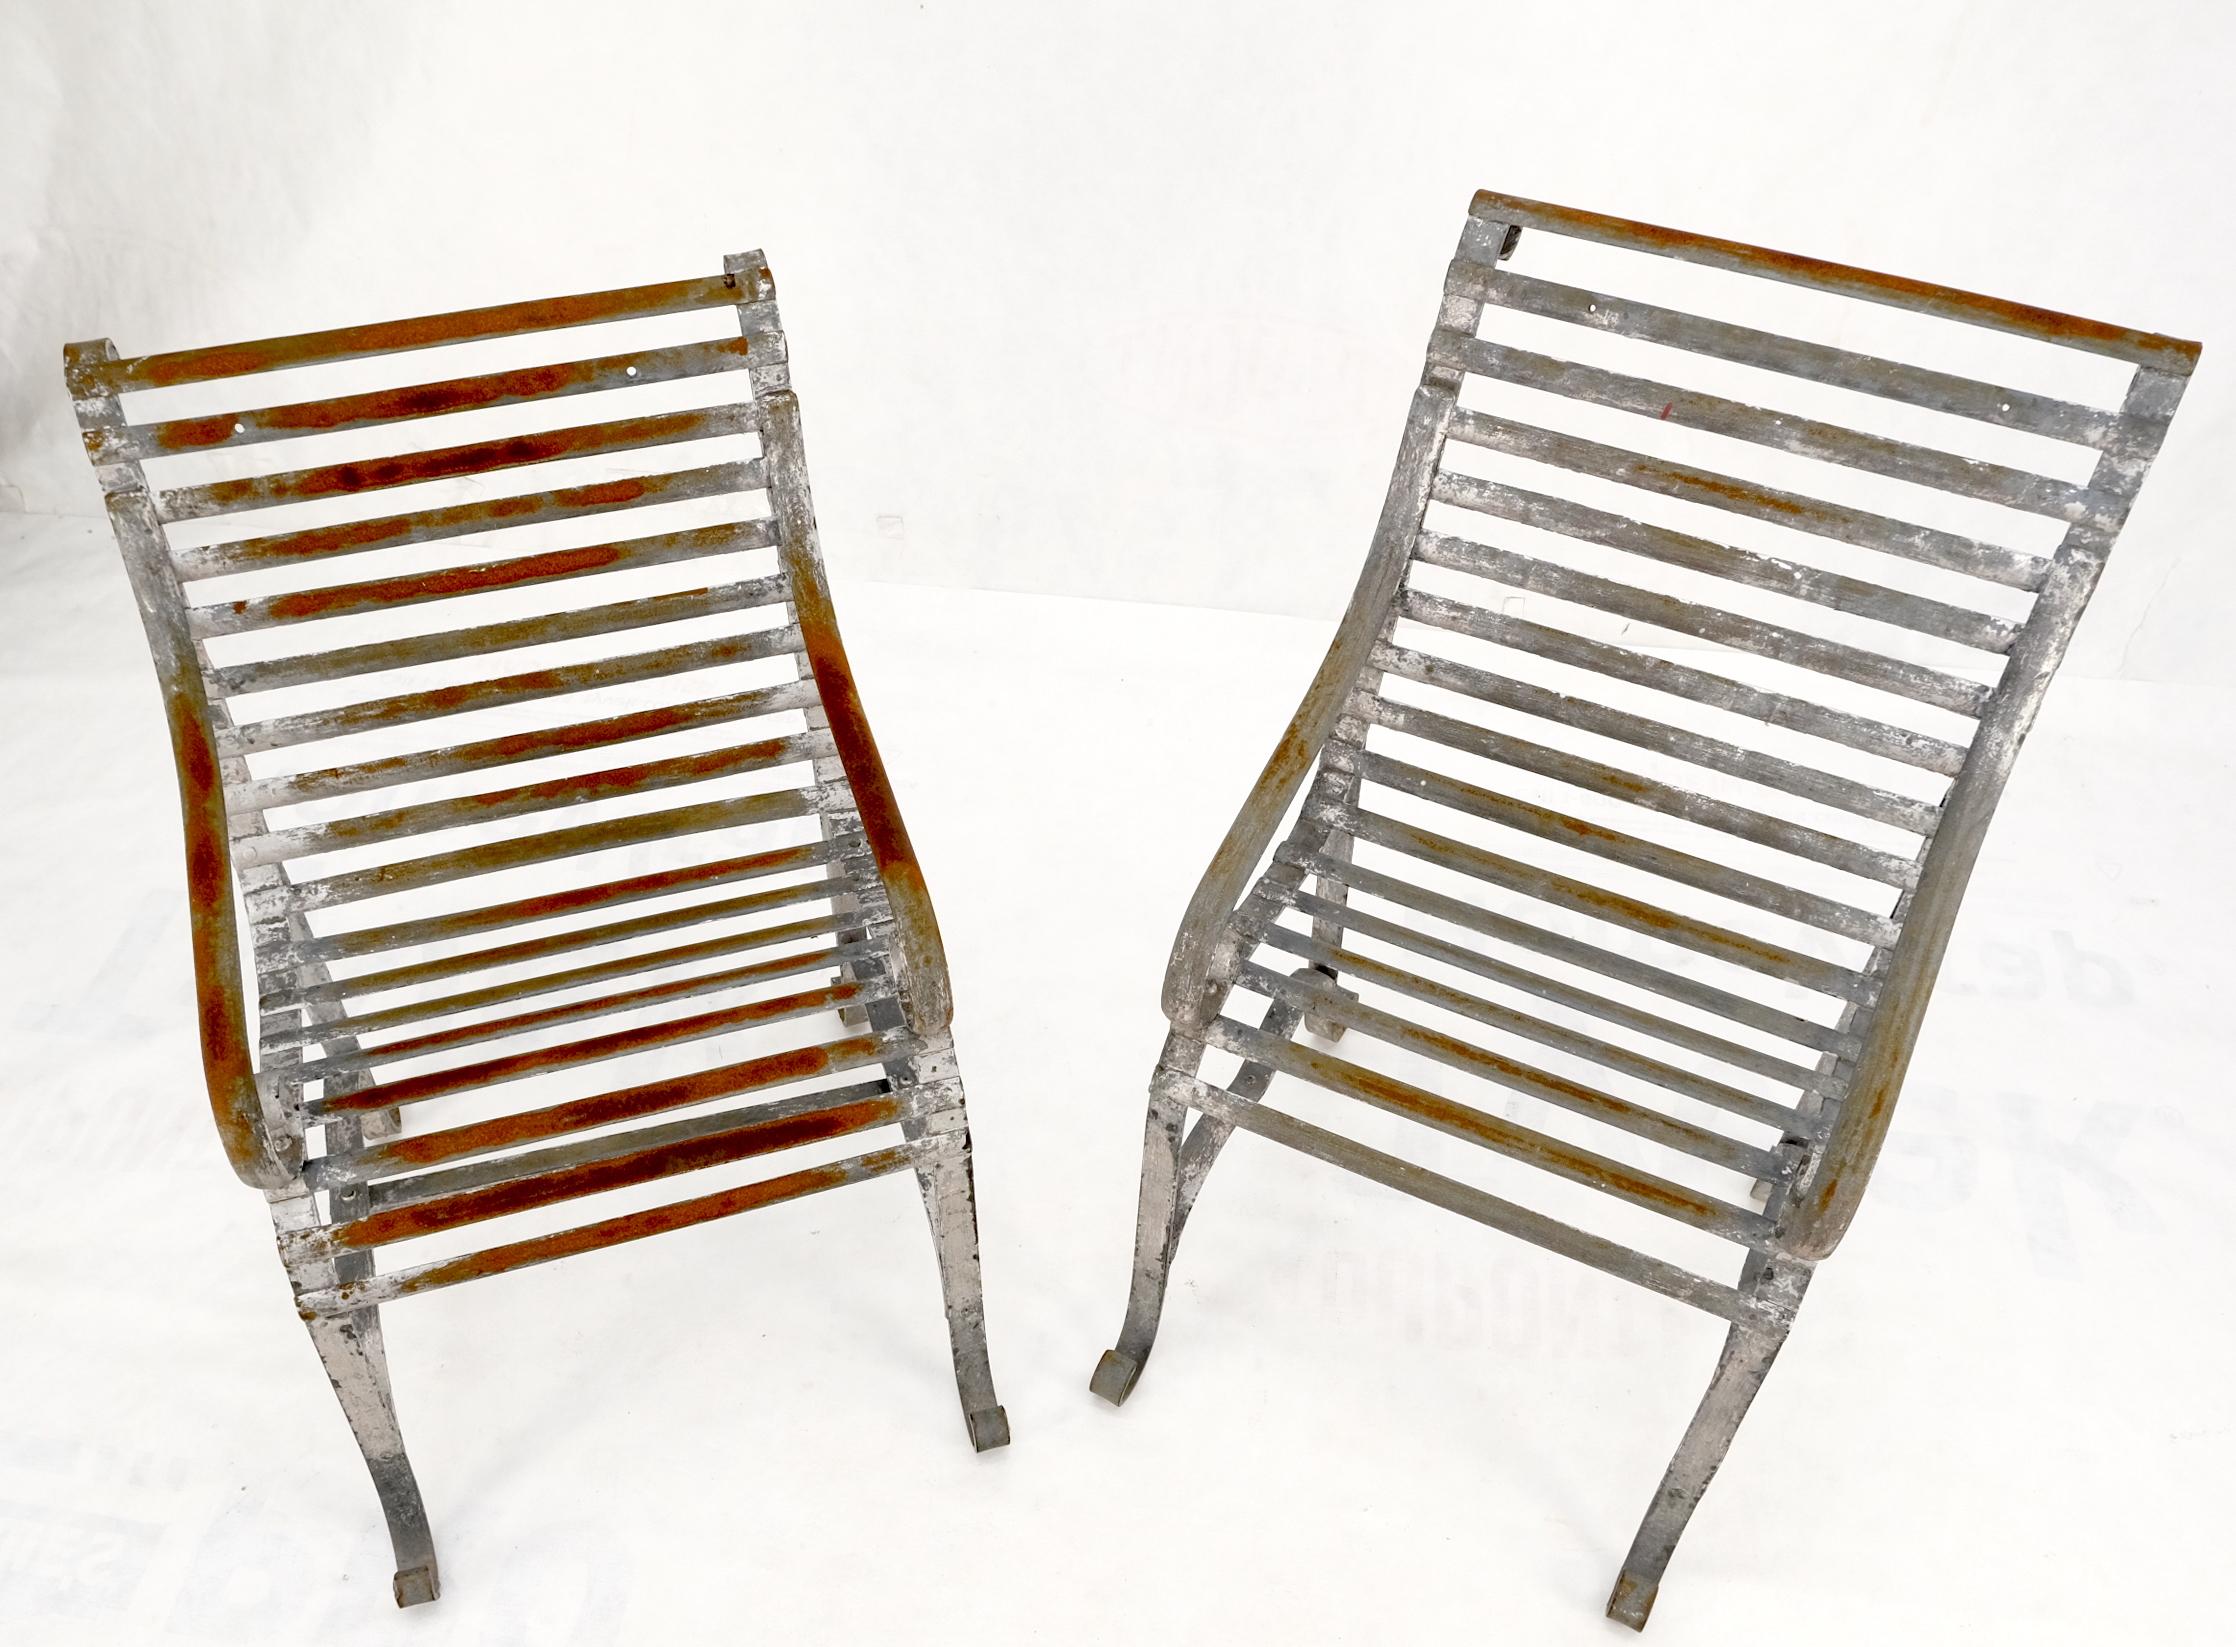 Heavy Antique Wrought Iron Outdoor Chairs His & Hers For Sale 2